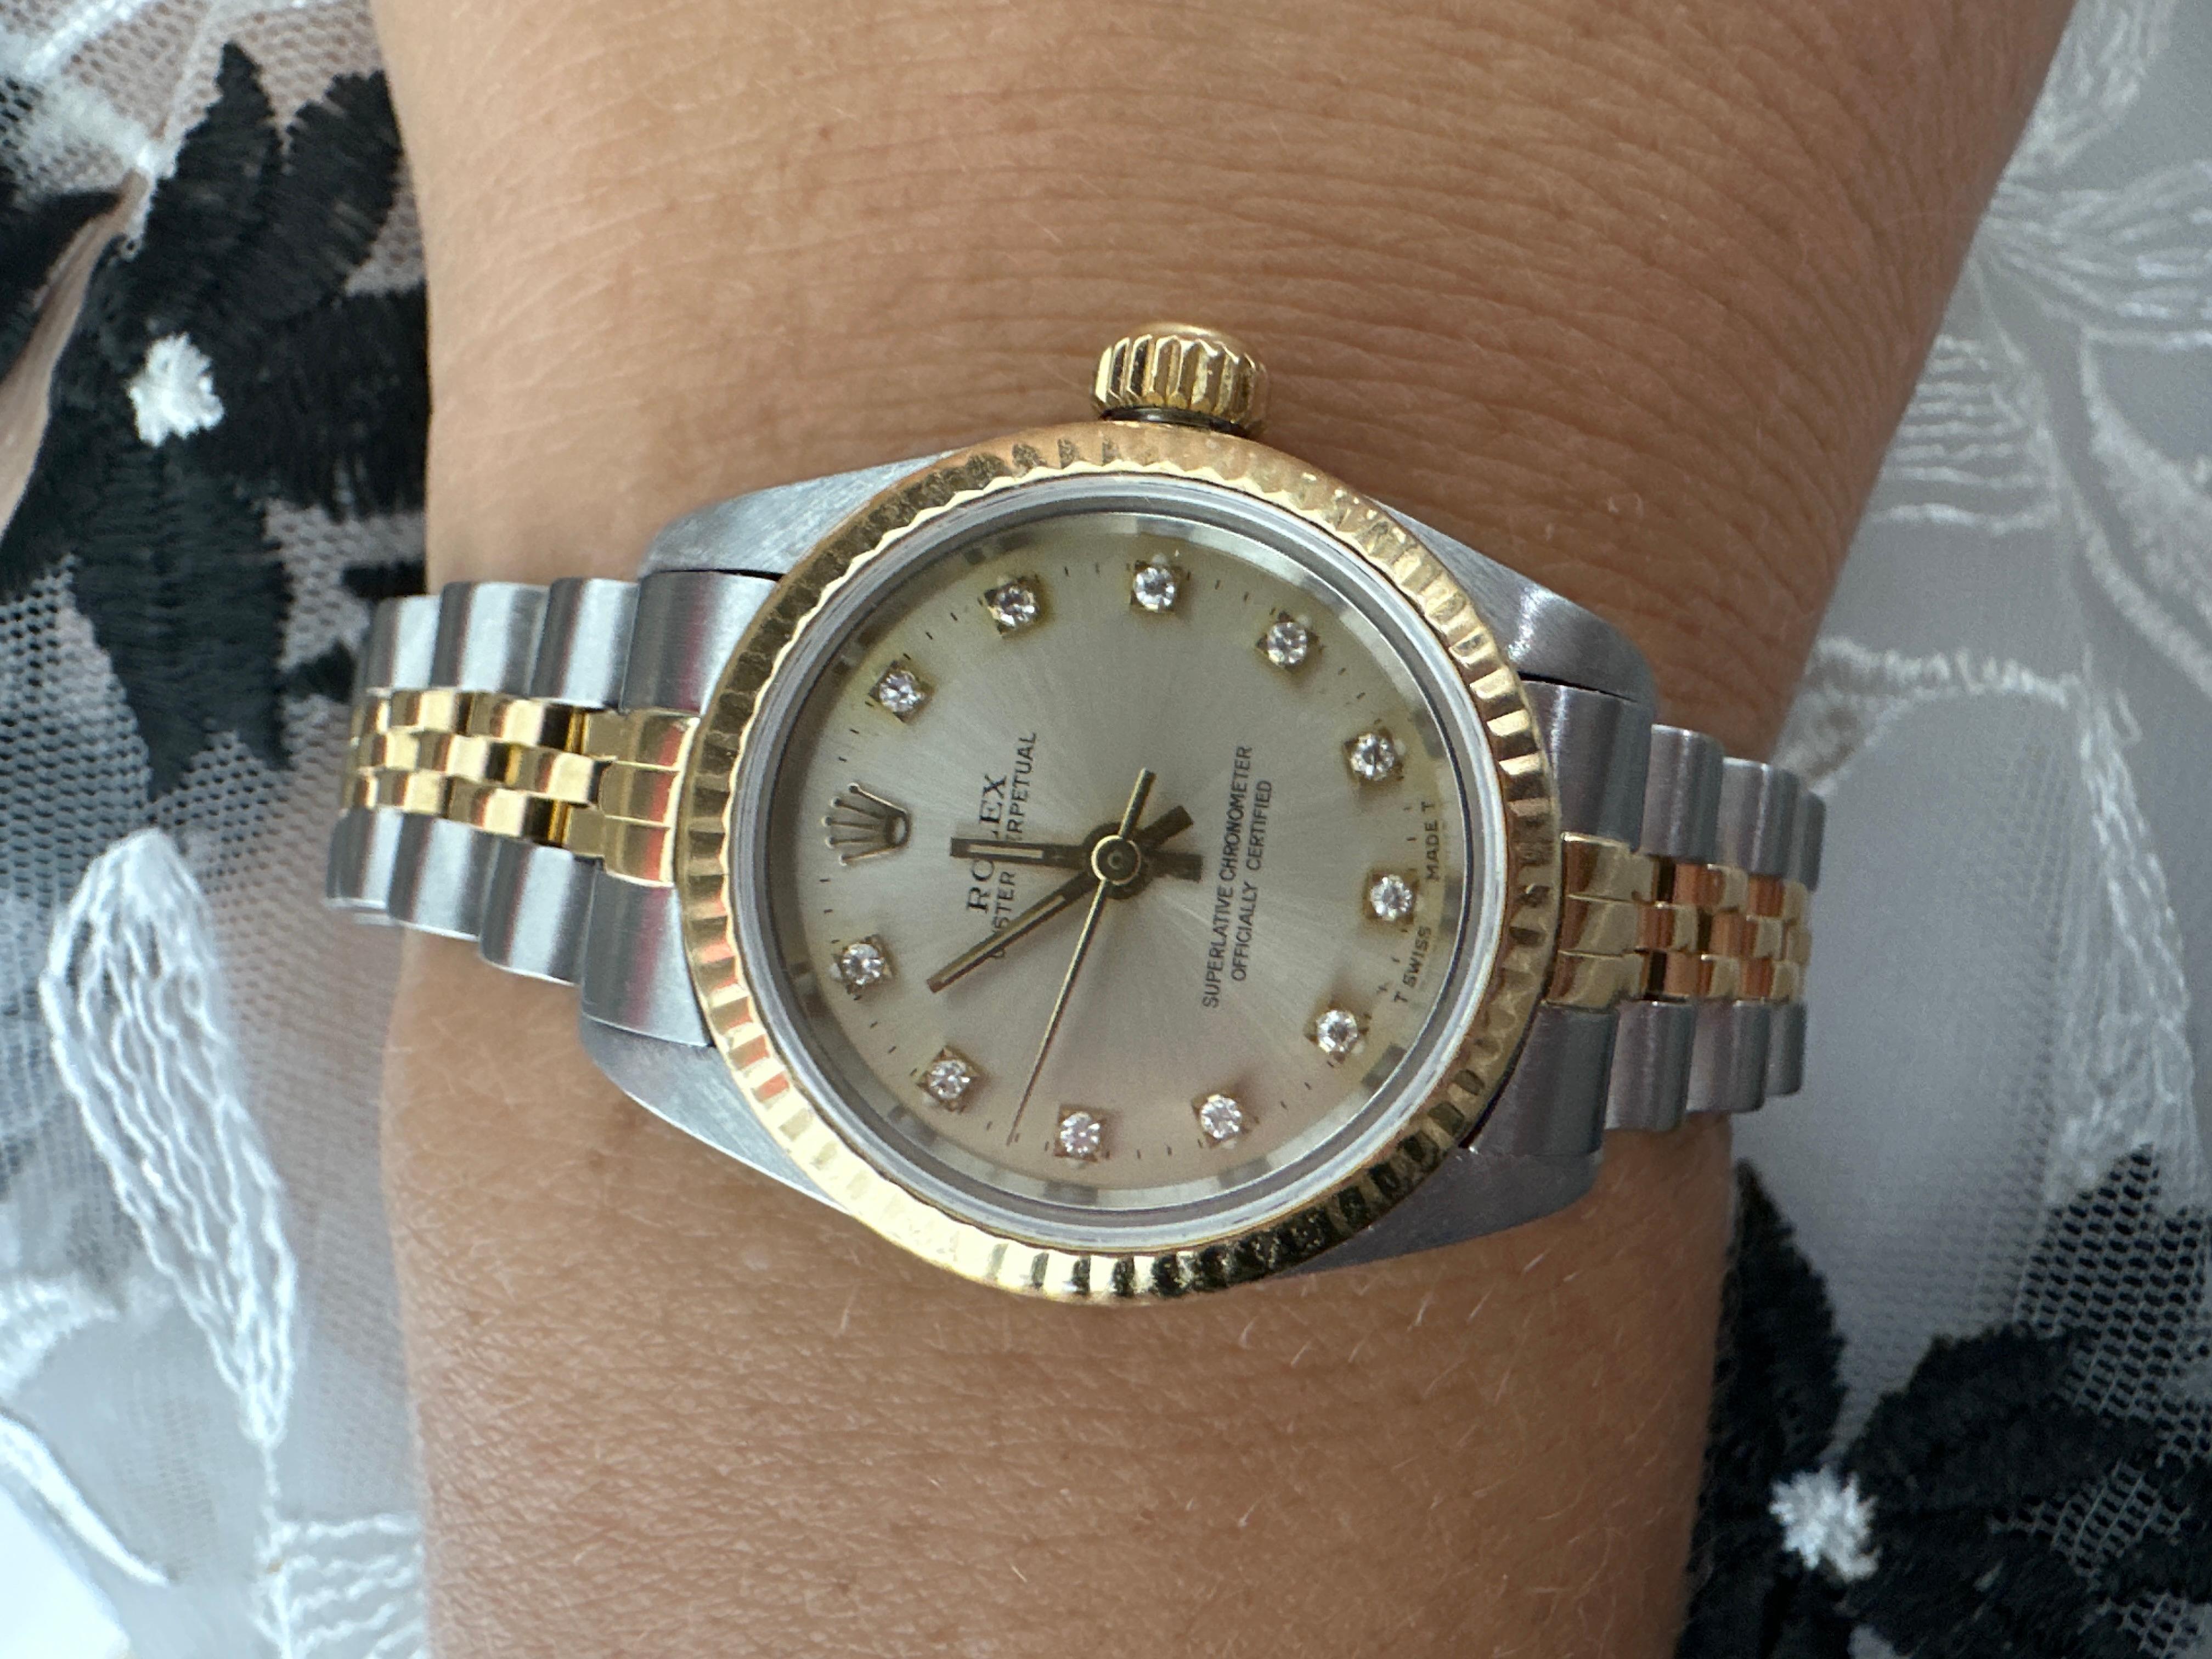 Elegant Authentic Rolex ladies small size, two tone with diamonds on dial. Model67193 E963777
Item#:500-00015MRPT


WHAT YOU GET AT STAMPAR JEWELERS:
Stampar Jewelers, located in the heart of Jupiter, Florida, is a custom jewelry store and studio